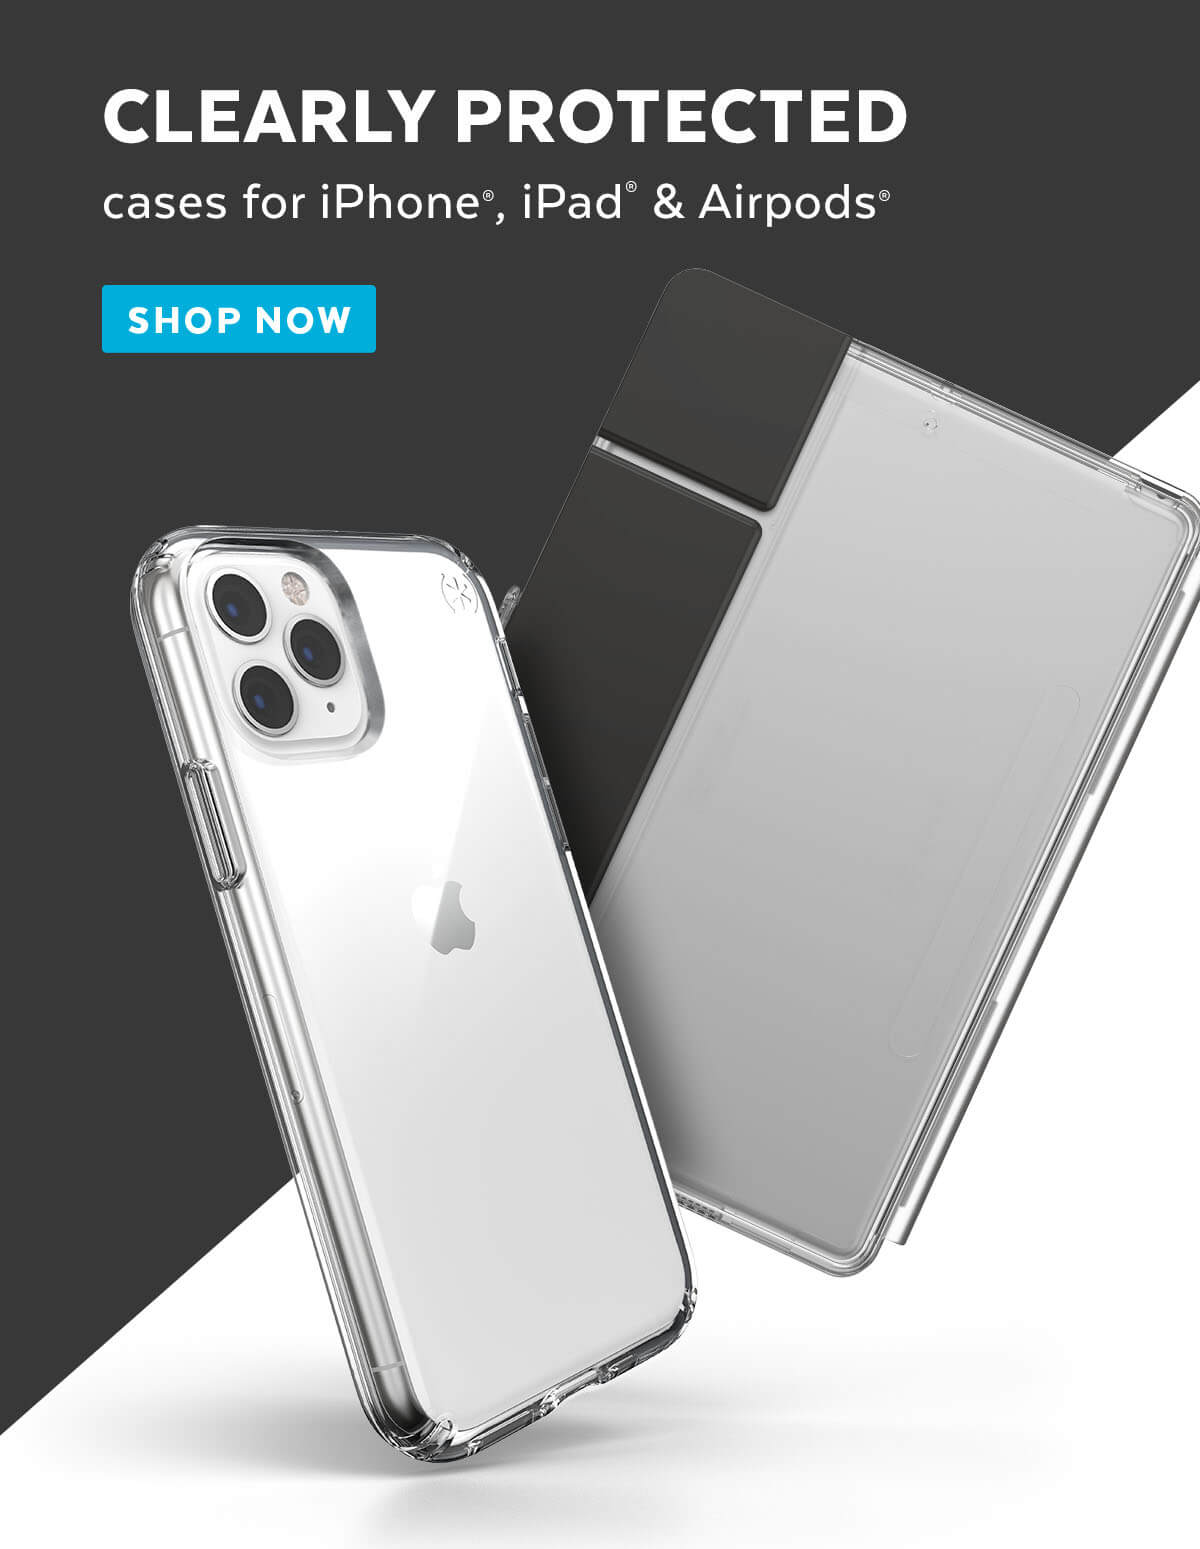 Clearly Protected: cases for iPhone, iPad & Airpods. Shop now. 